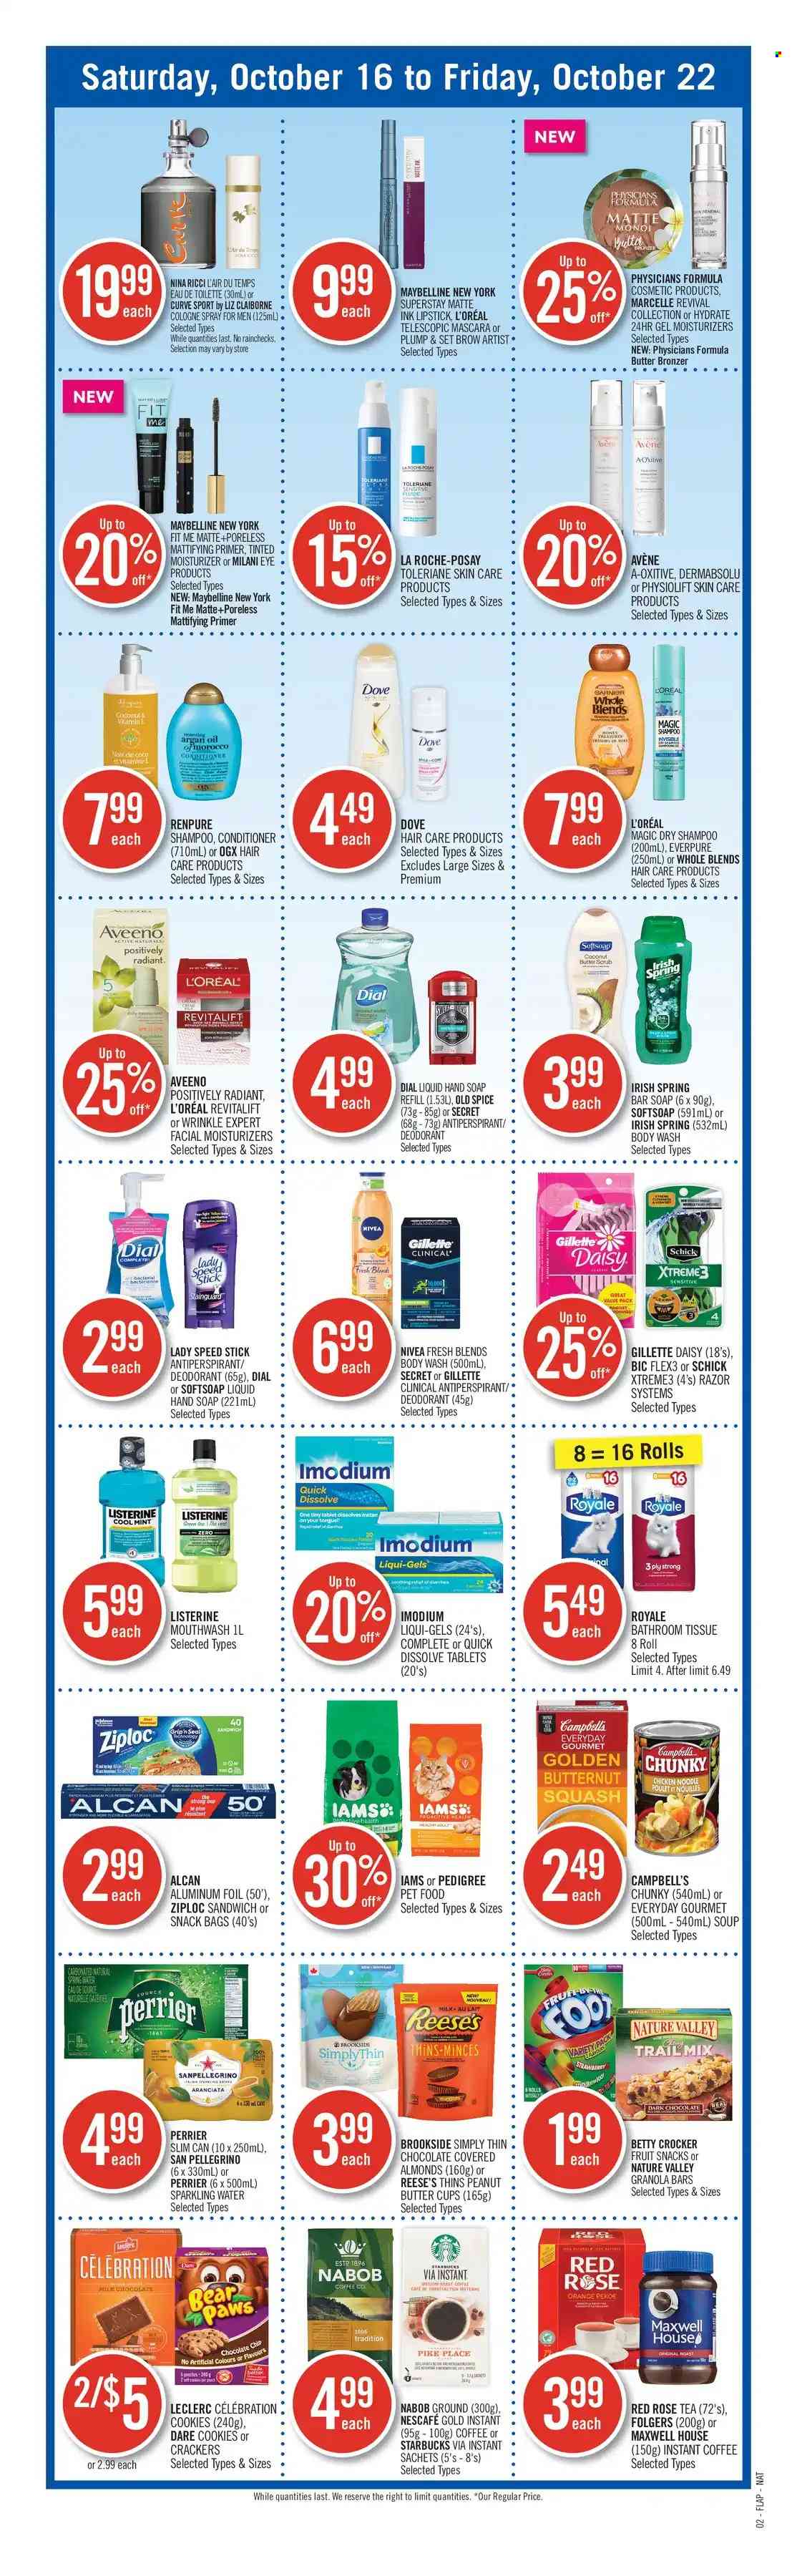 thumbnail - Shoppers Drug Mart Flyer - October 16, 2021 - October 22, 2021 - Sales products - cookies, milk chocolate, Celebration, crackers, Reese's, dark chocolate, peanut butter cups, fruit snack, Thins, soup, granola bar, Nature Valley, noodles, spice, Campbell's, almonds, trail mix, Perrier, spring water, sparkling water, San Pellegrino, Maxwell House, tea, instant coffee, Folgers, Starbucks, Aveeno, bath tissue, body wash, Softsoap, hand soap, soap bar, Dial, soap, mouthwash, L’Oréal, La Roche-Posay, moisturizer, OGX, conditioner, anti-perspirant, cologne, Speed Stick, BIC, razor, Schick, bag, Ziploc, lipstick, mascara, bronzing powder, Dove, eau de toilette, Gillette, Listerine, Maybelline, shampoo, Imodium, Nivea, Old Spice, Nescafé, deodorant. Page 18.